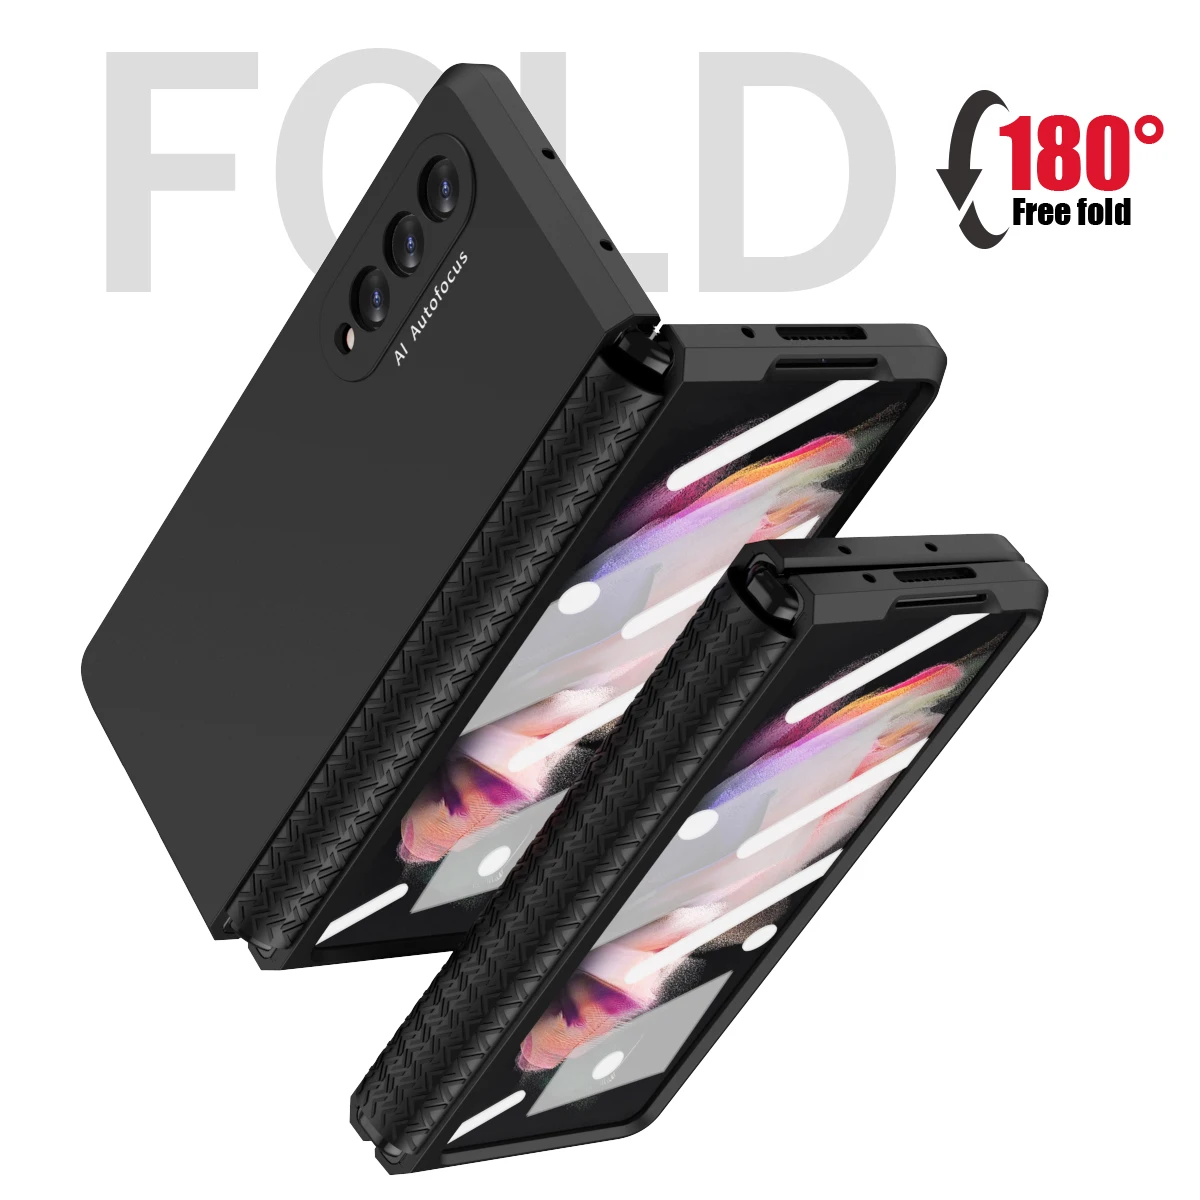 Hinge Soft Coverage Full Body Case for Samsung Galaxy Z Fold 3 2 W21 W22 5G  with Front Screen Glass Armor Anti-Knock Slim Cover